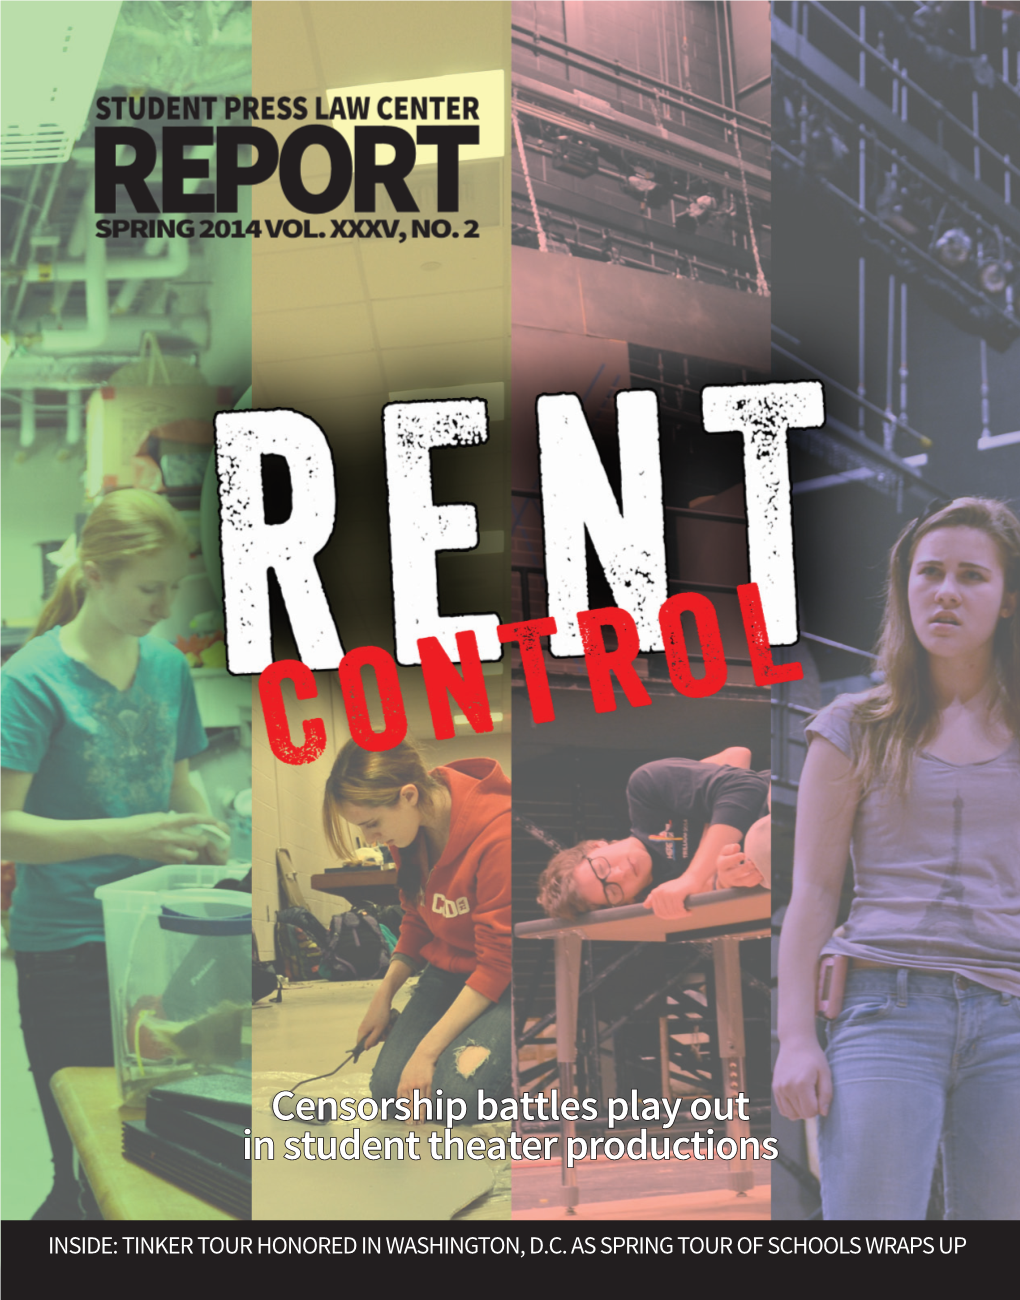 Censorship Battles Play out in Student Theater Productions